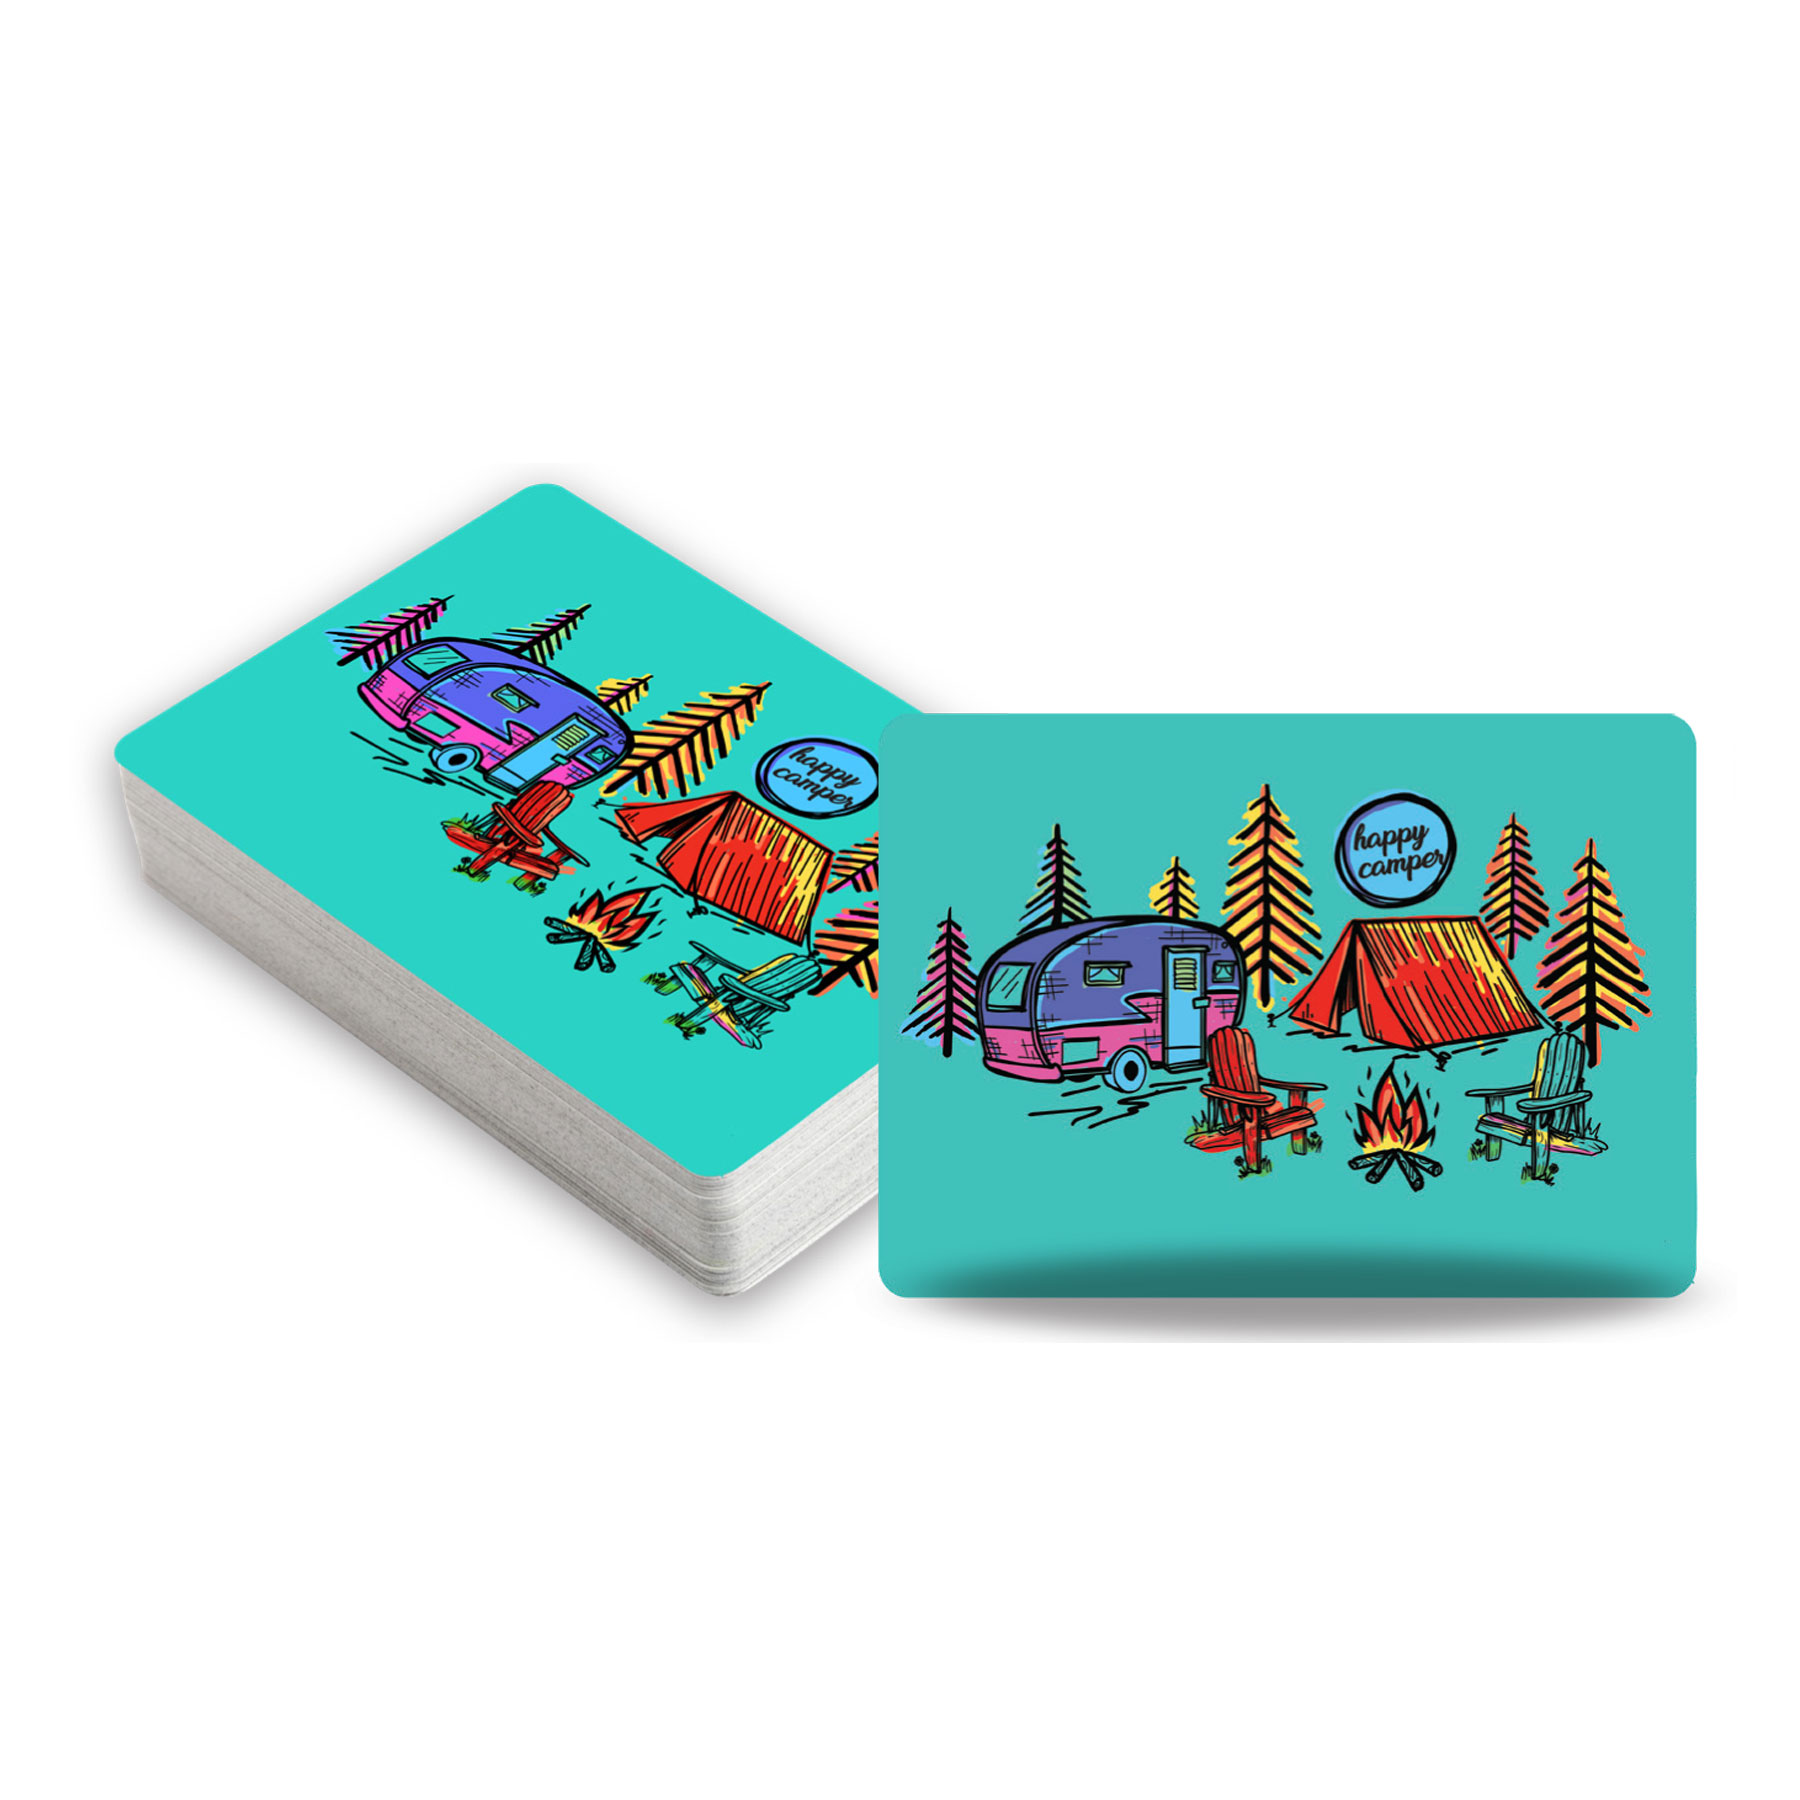 HAPPY CAMPER SCENE PLAYING CARDS